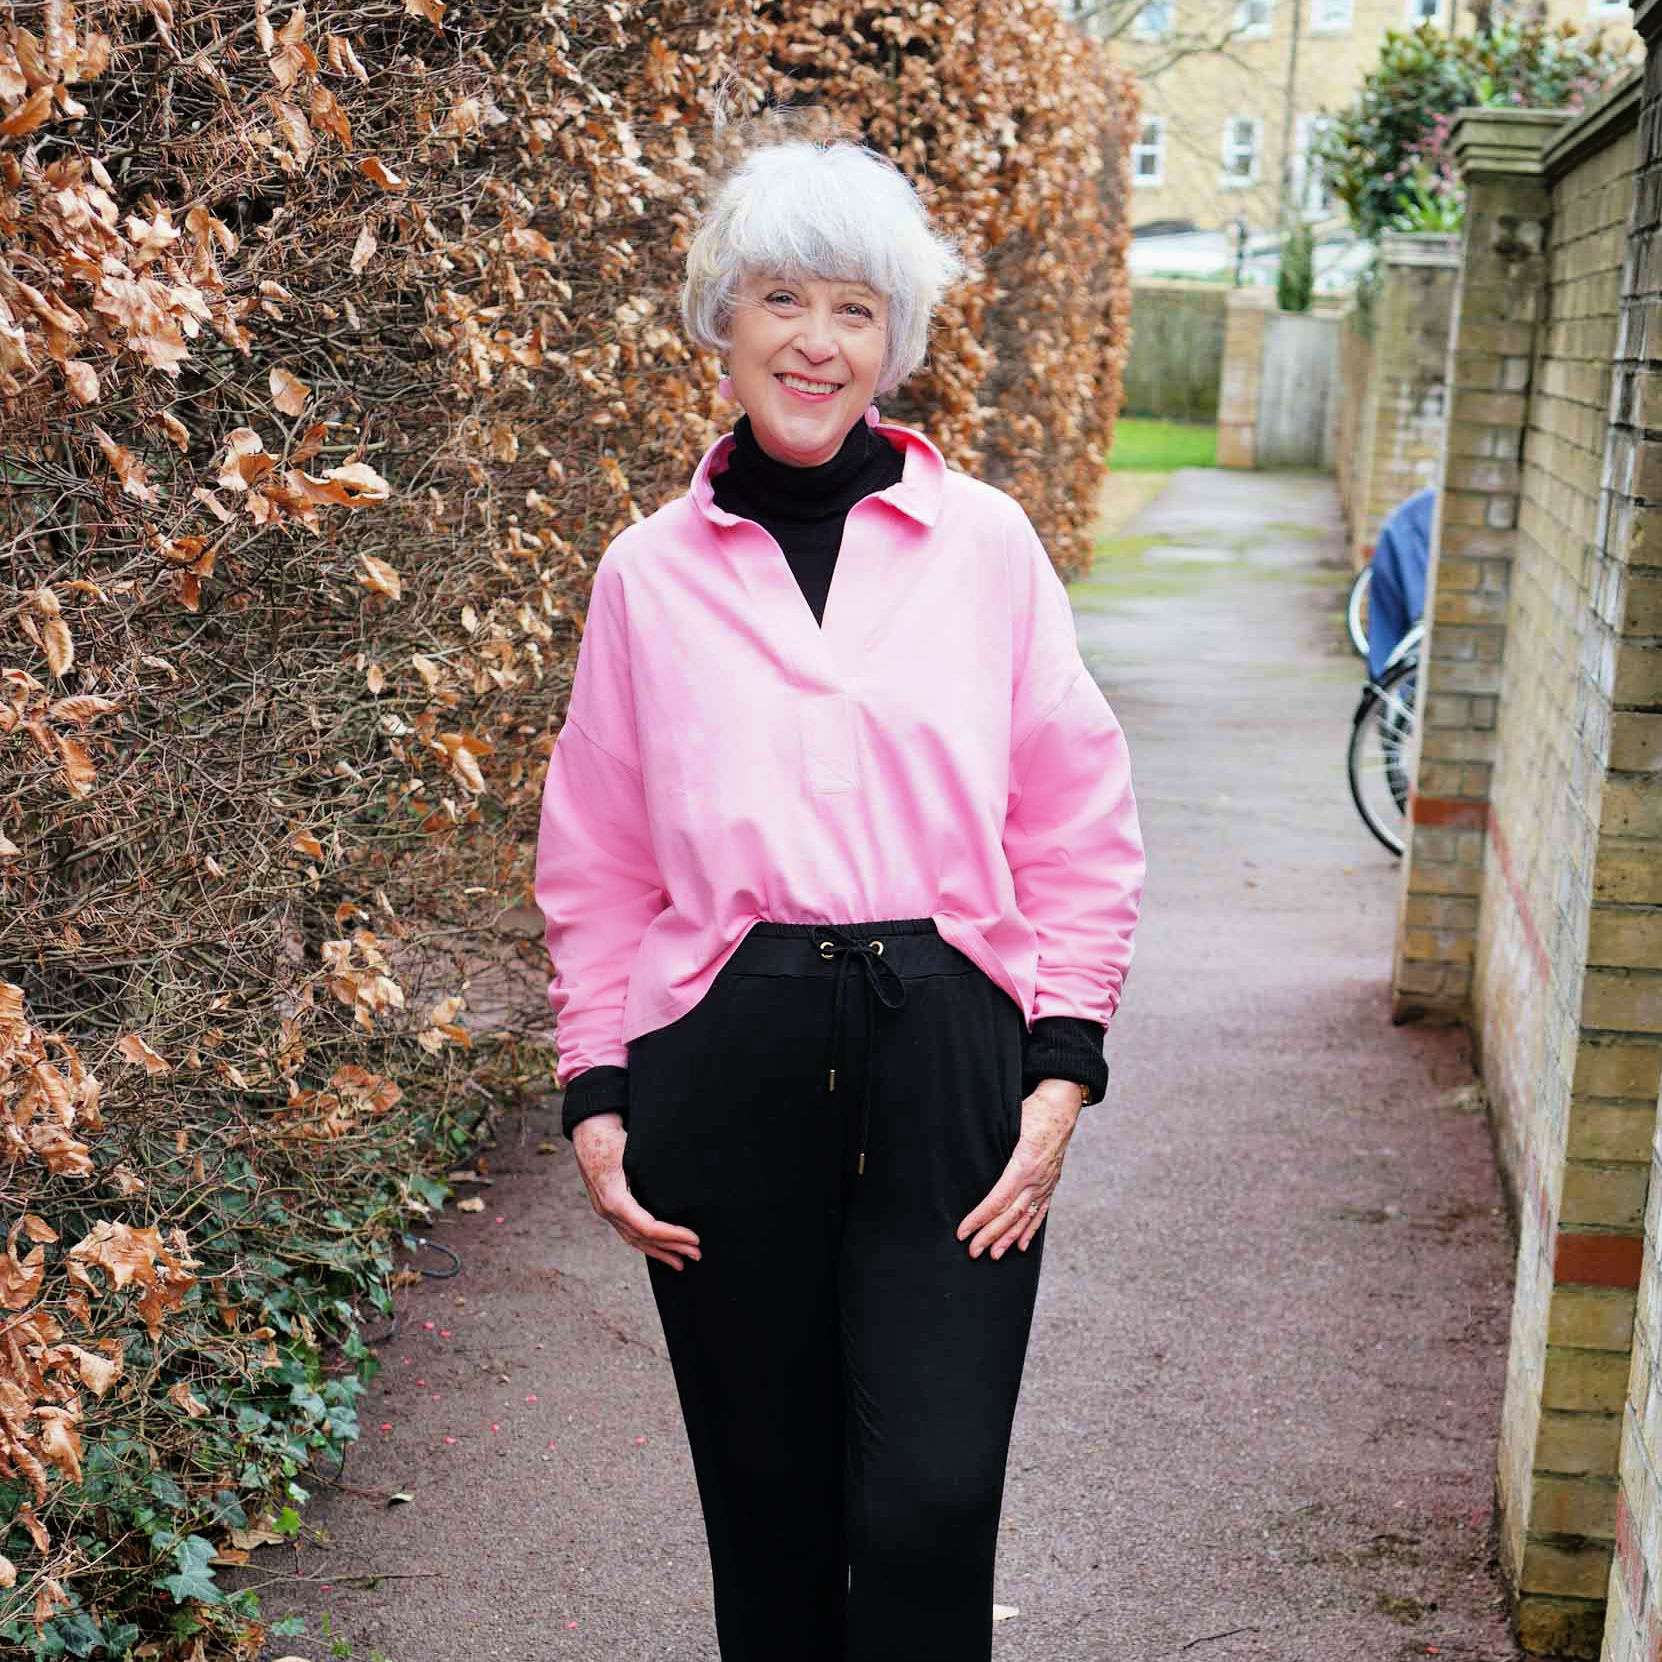 New Spring colours to lift your wardrobe - Chic at any age